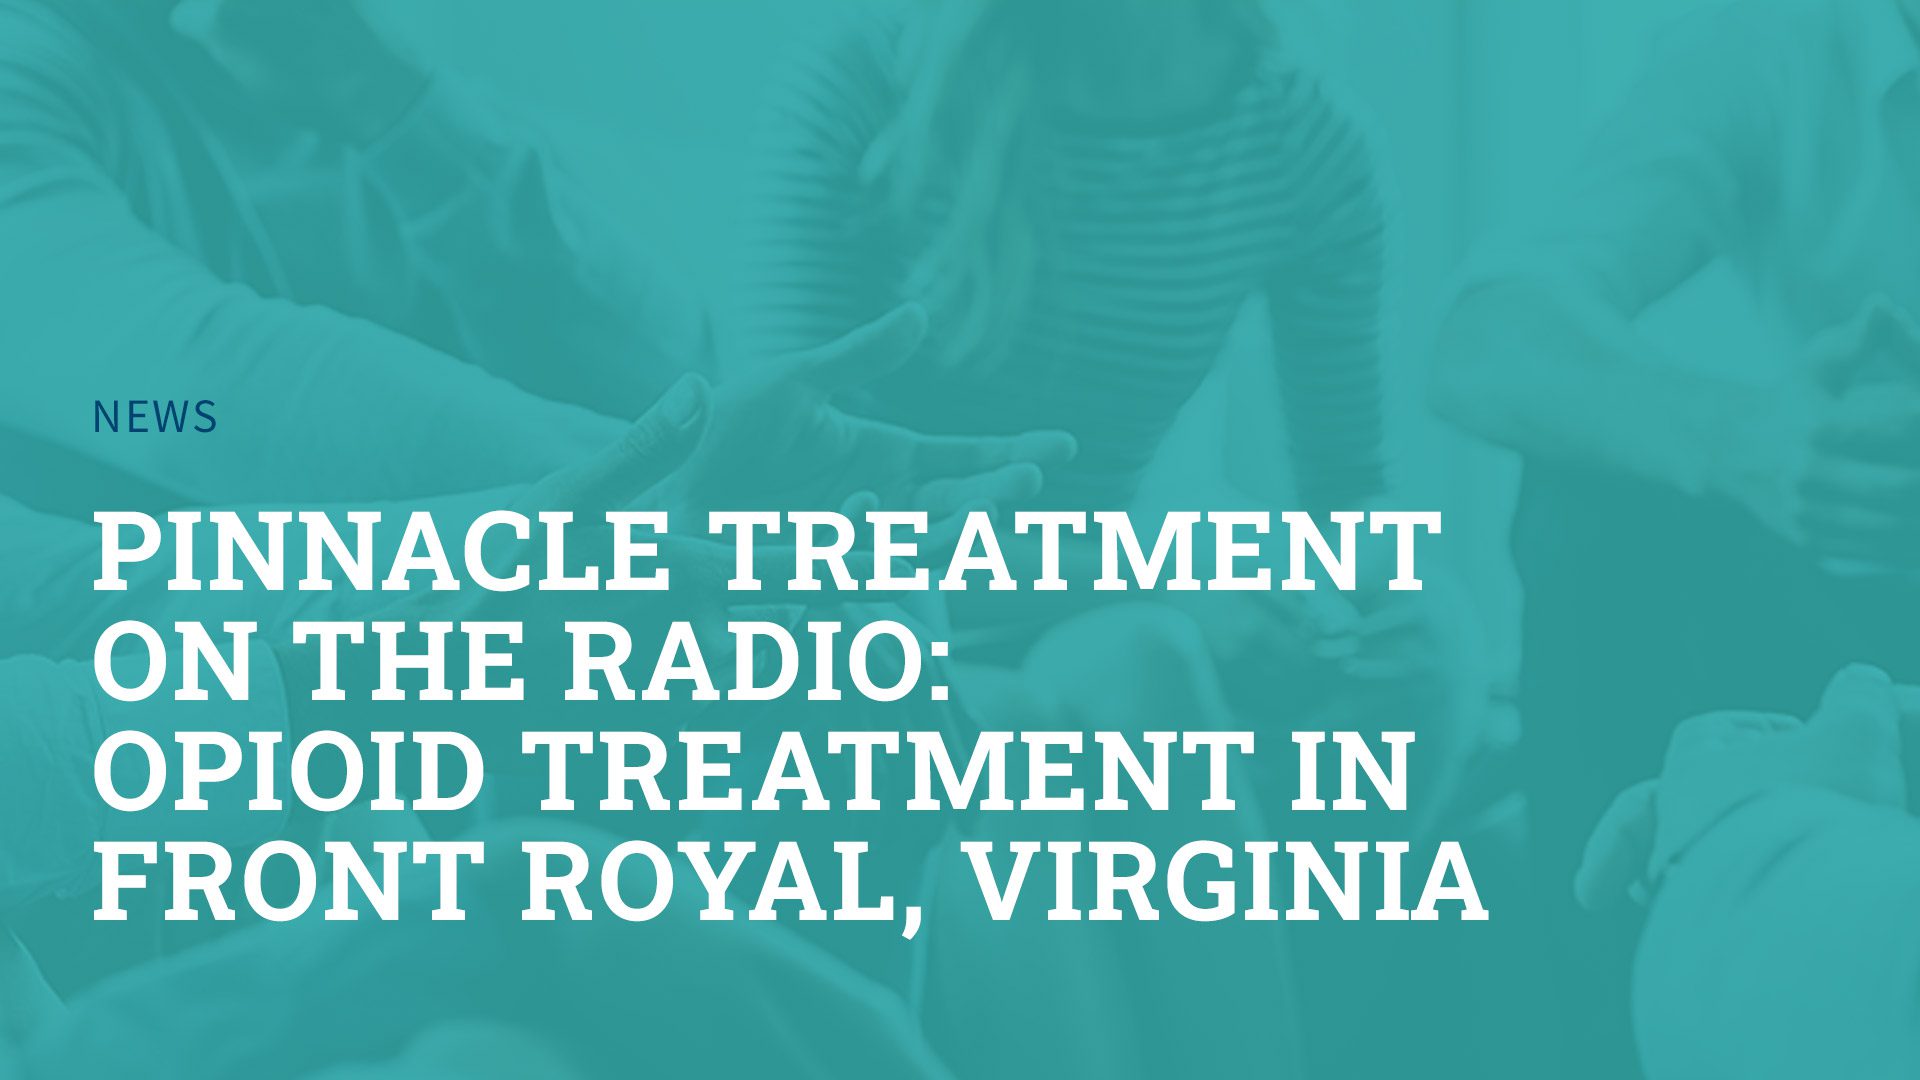 Pinnacle Treatment on the Radio: Opioid Treatment in Front Royal, Virginia